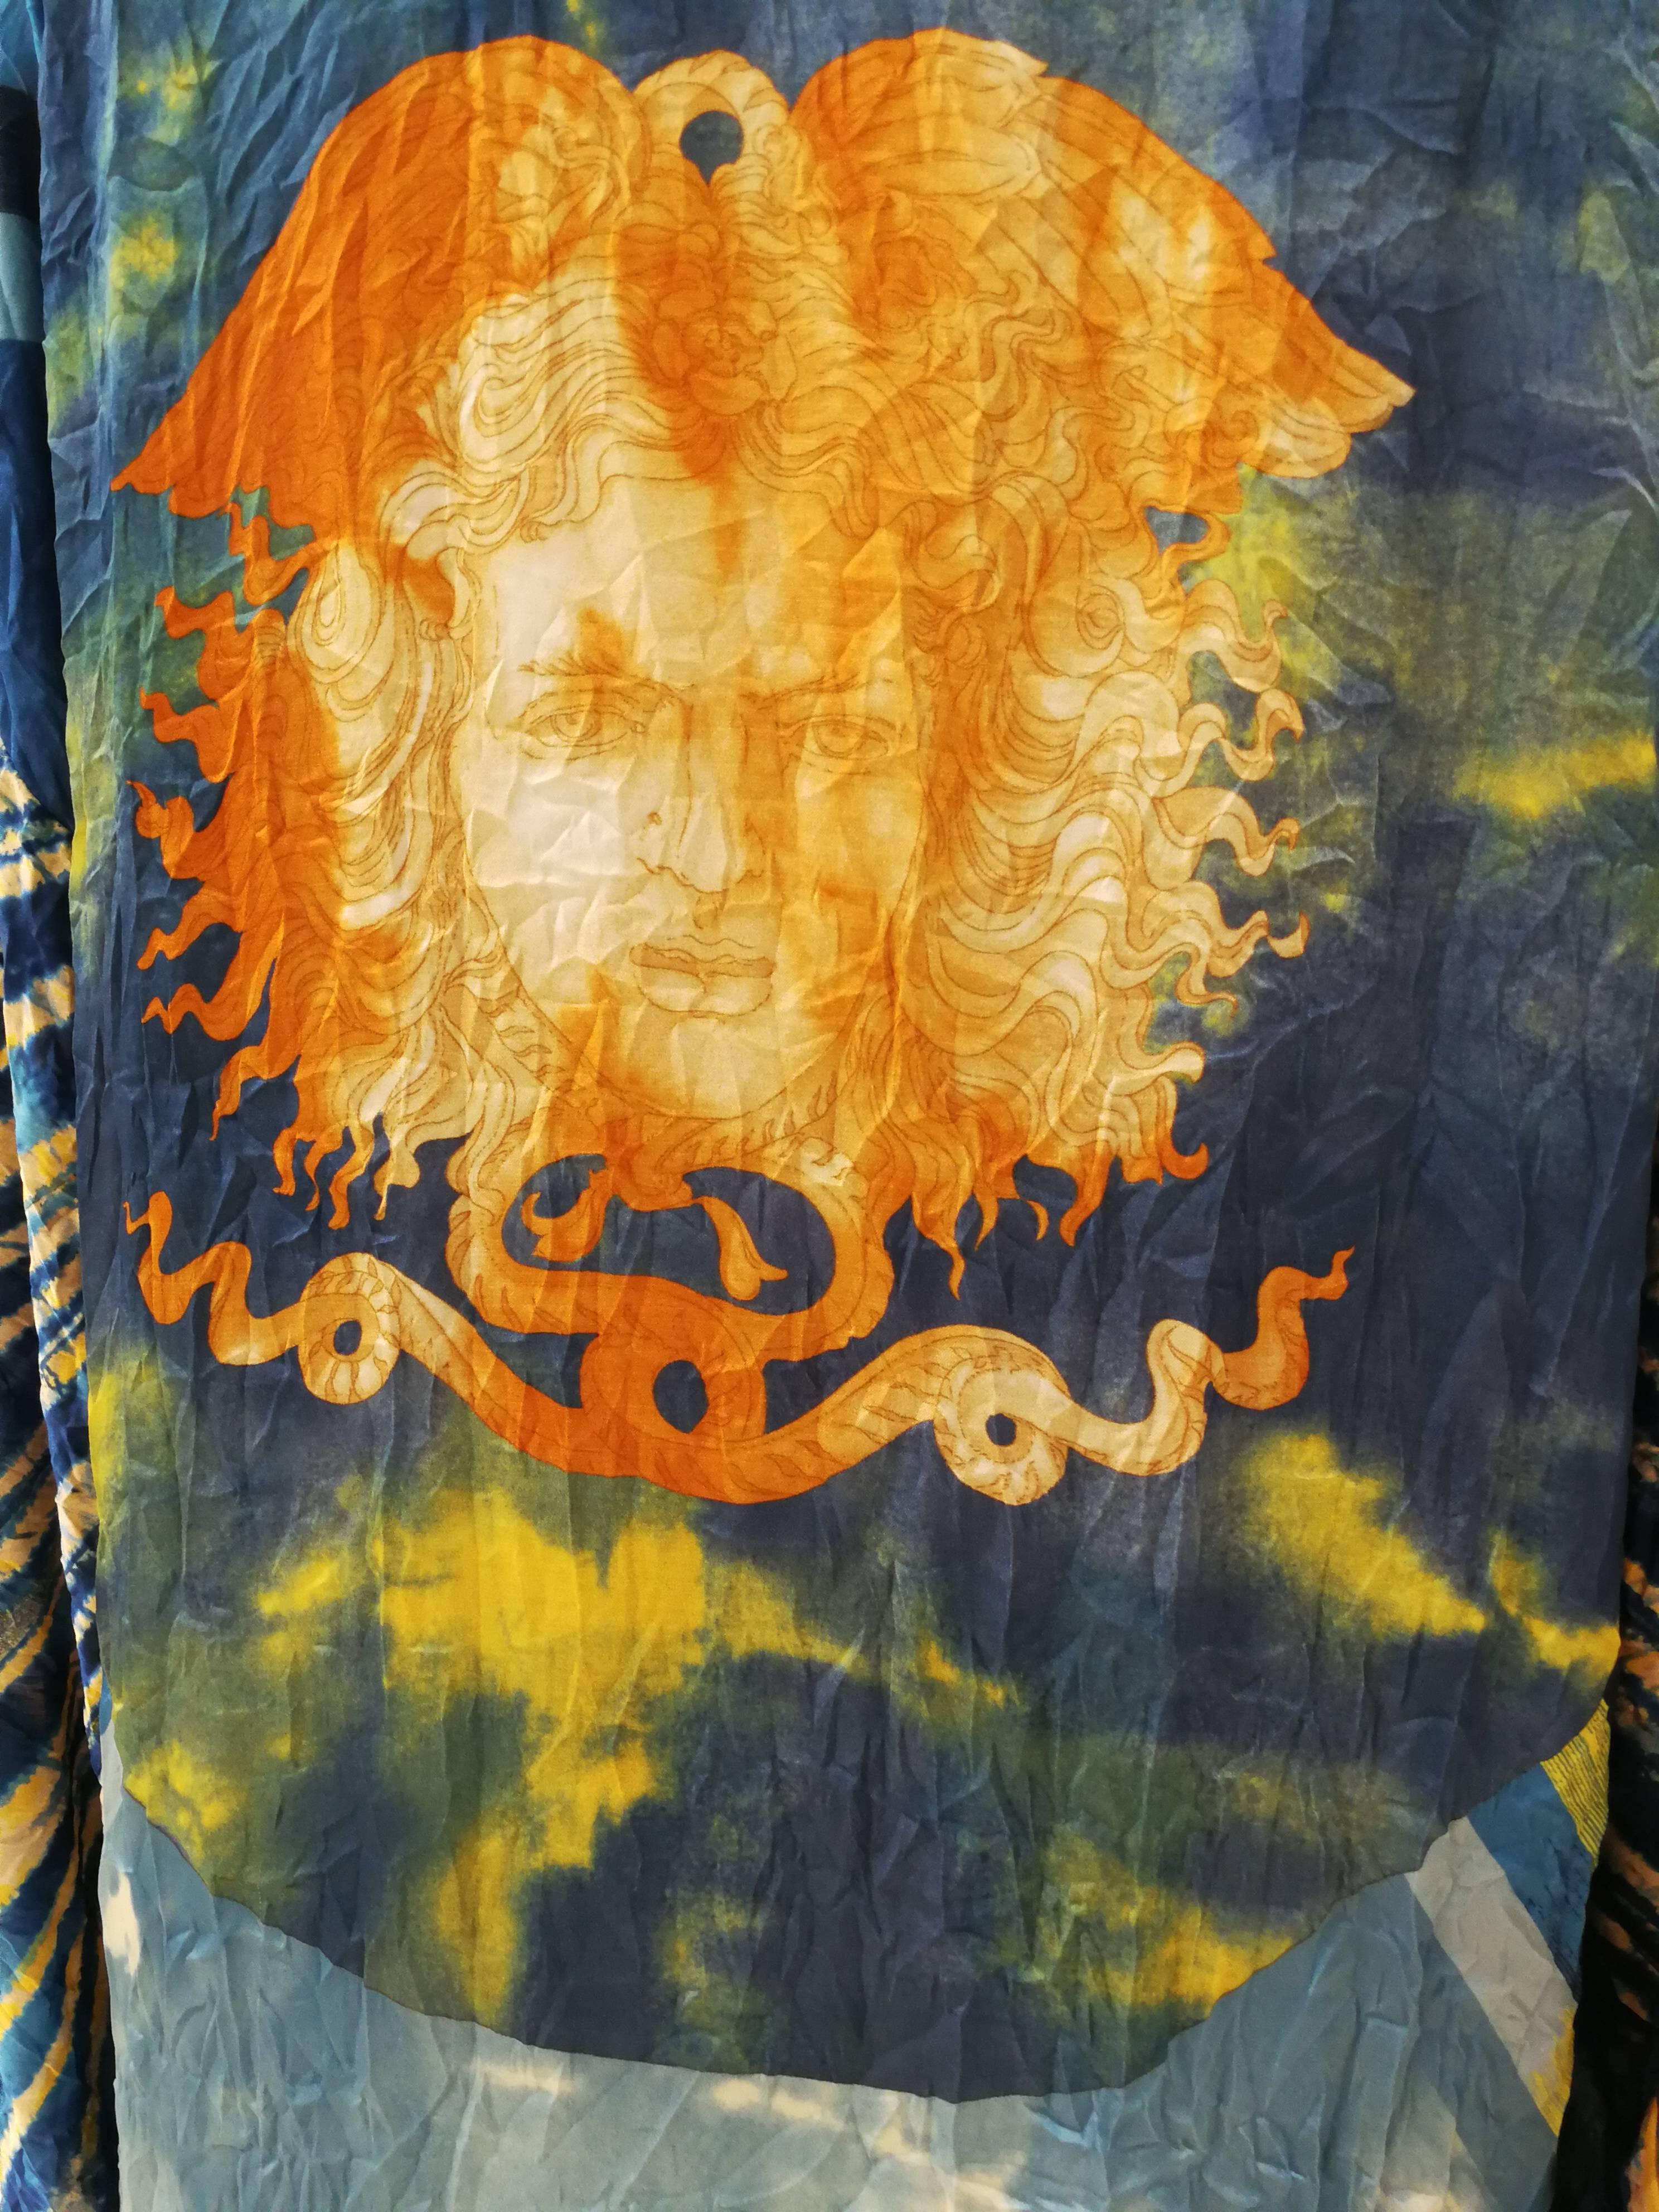 Versace blue and yellow Medusa Silk Blouse

Totally made in Italy in size 38